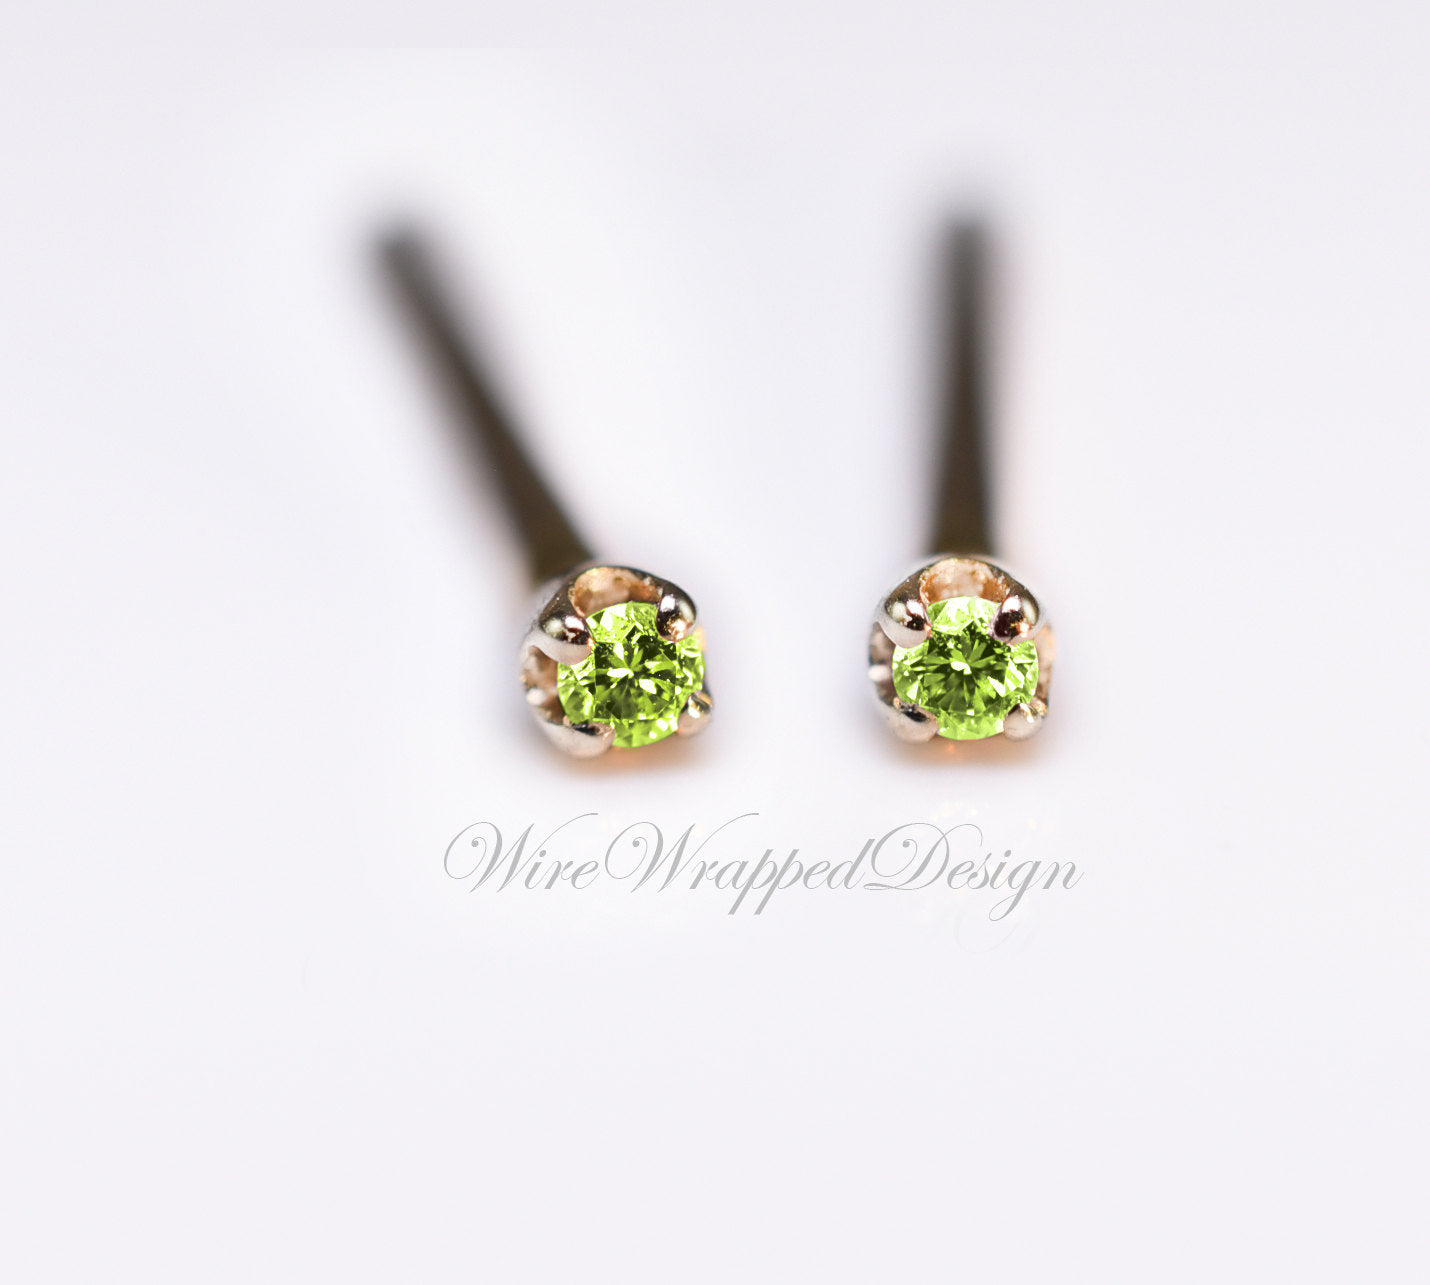 Genuine GREEN DIAMOND Earring Studs 1.3mm 0.02tcw Post 14k Solid Gold (Yellow, Rose or White), Platinum, Silver Lobe Cartilage Helix Tragus